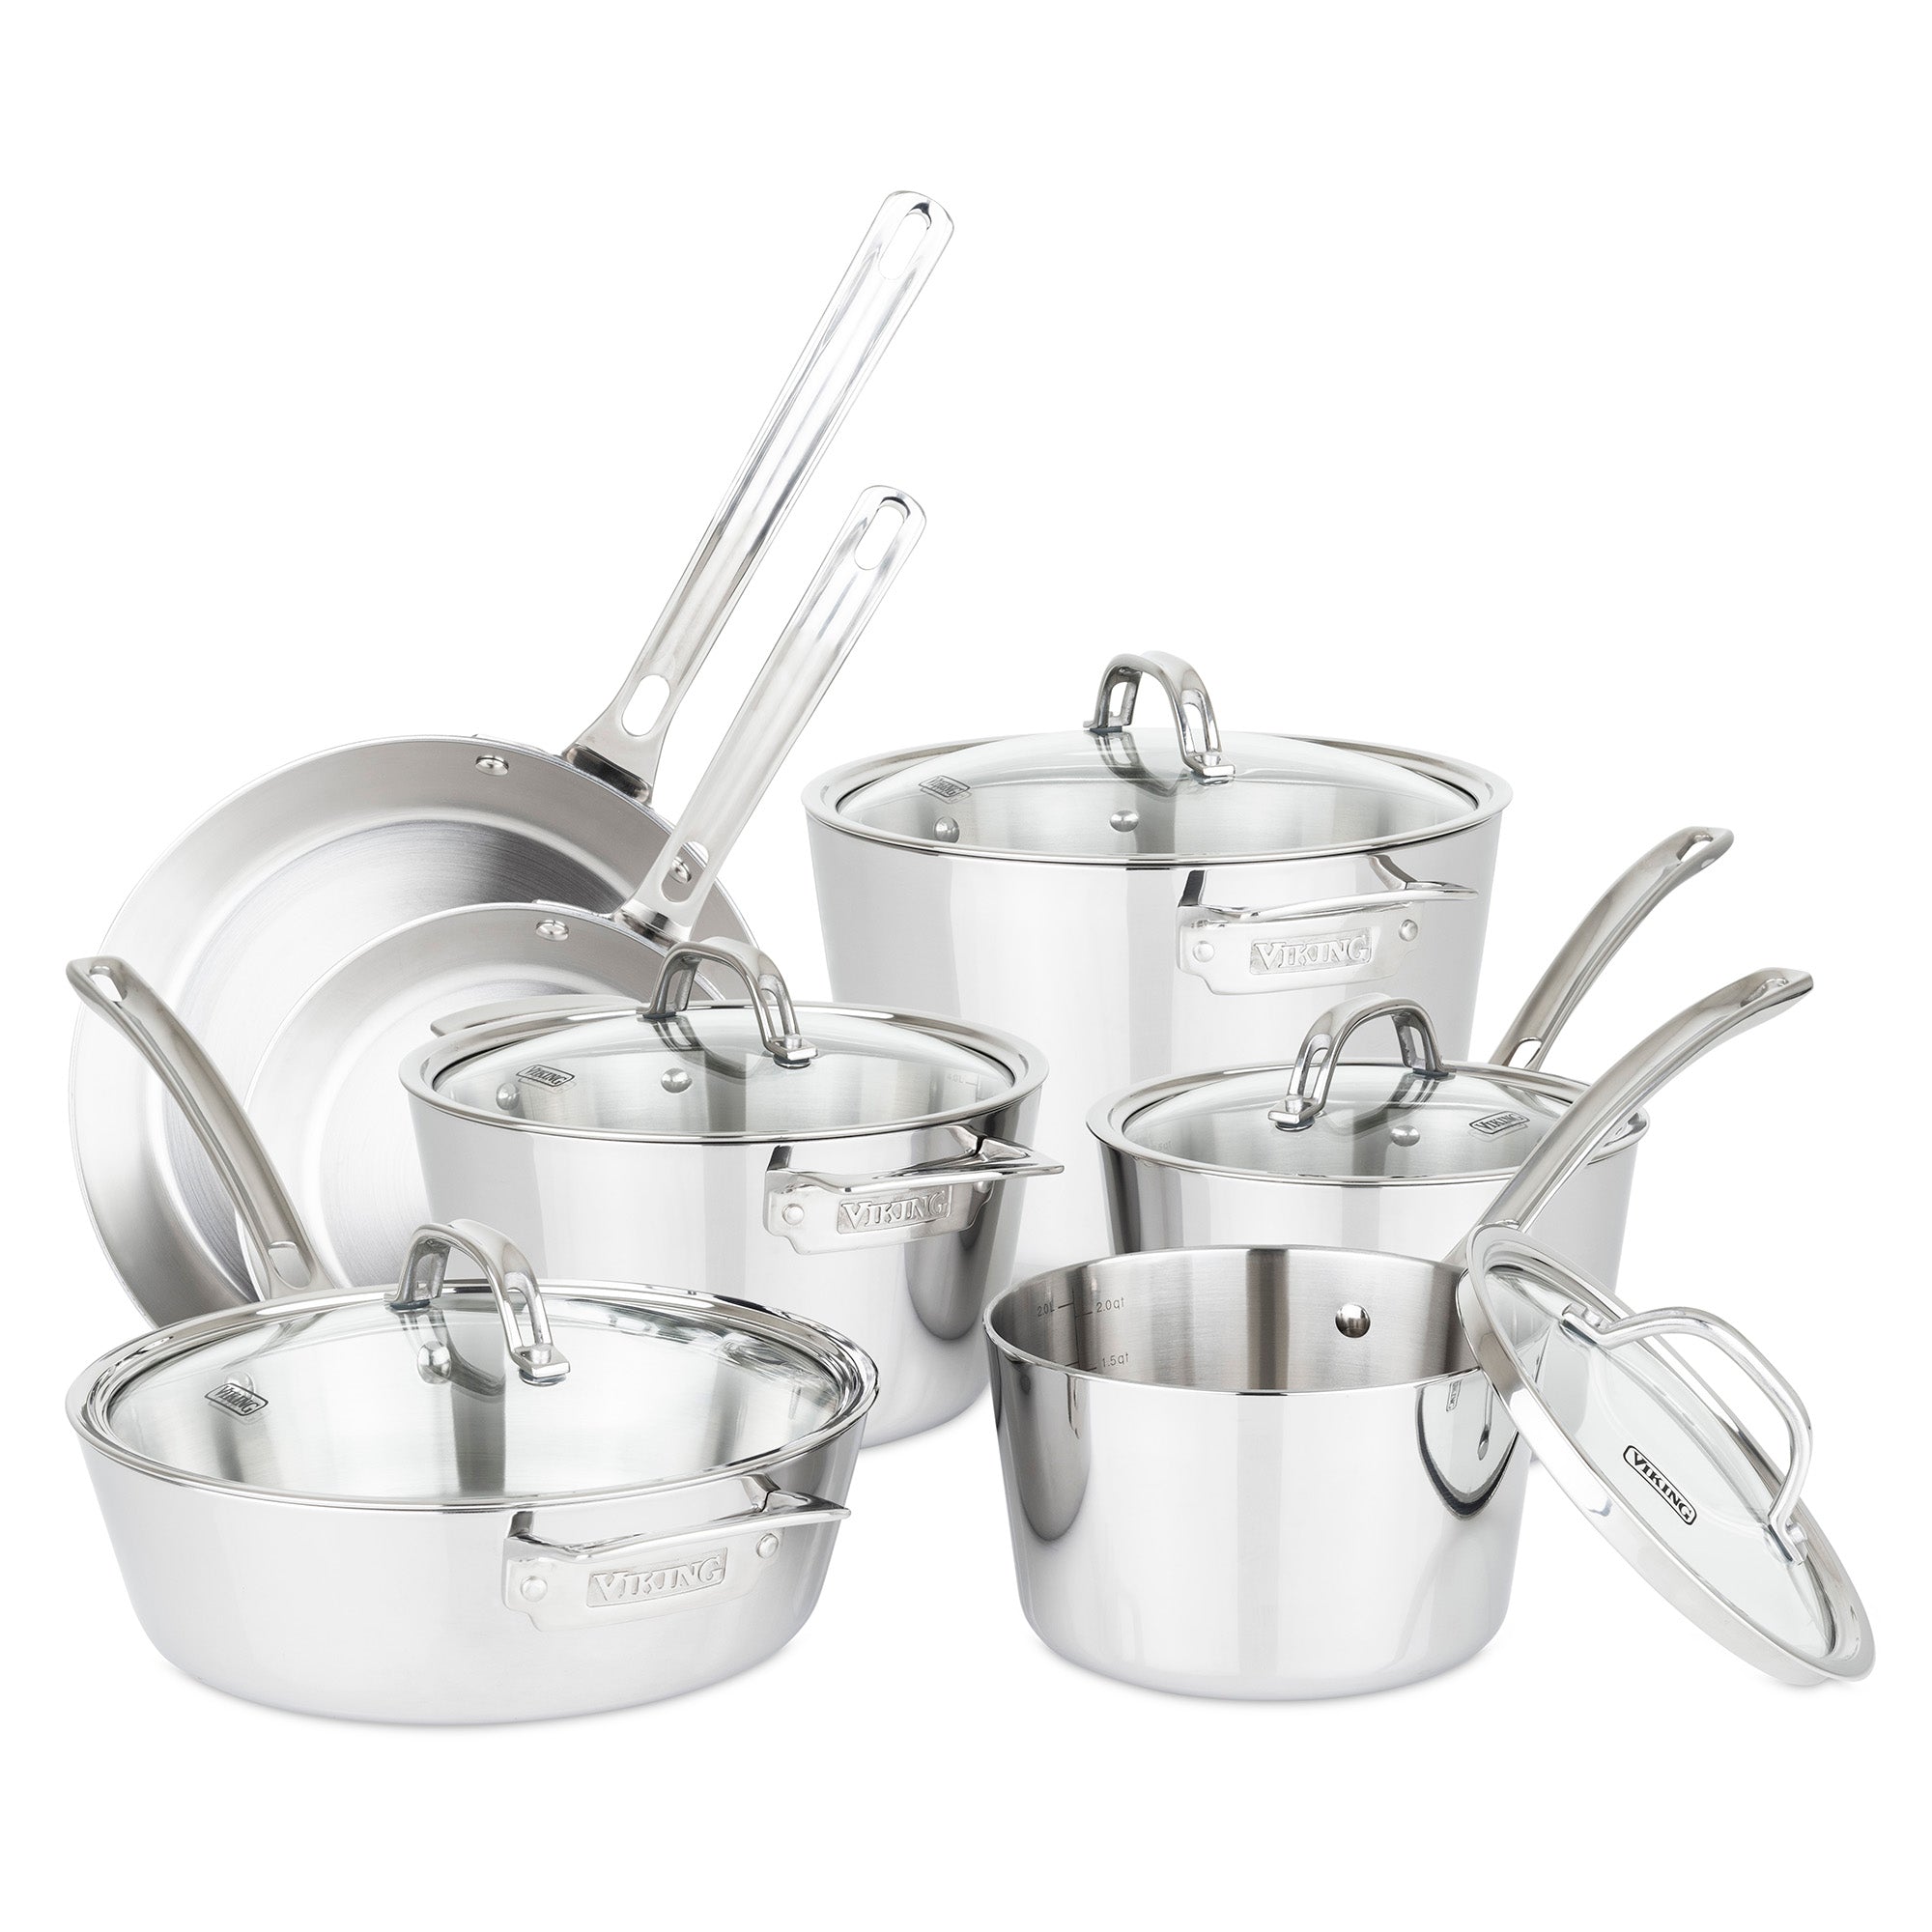 12 Piece Cookware Set With Lids